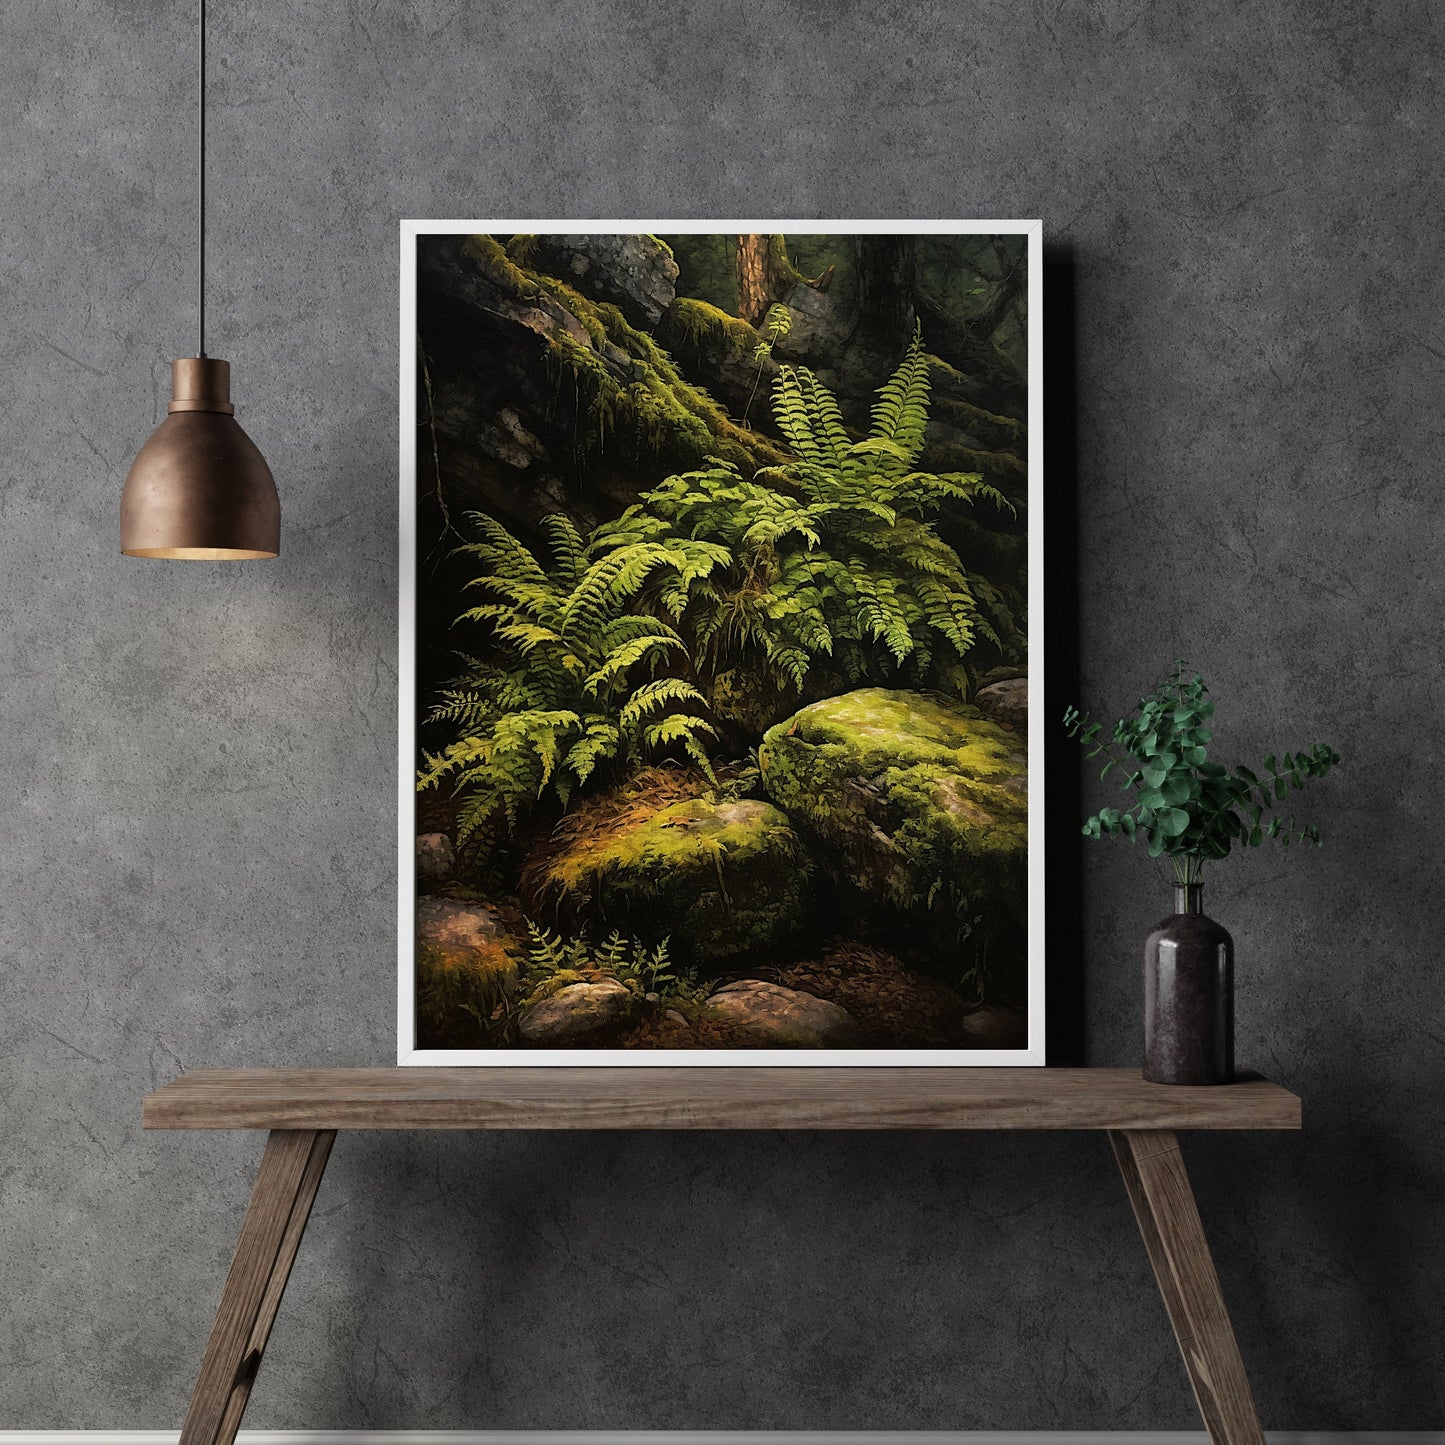 Fern and Rocks in Deep Forest Dark Cottagecore Wall Art Vintage Botanical Decor Green Aesthetic Wall Art Goblincore Oil Painting Dark Moody Paper Poster Print